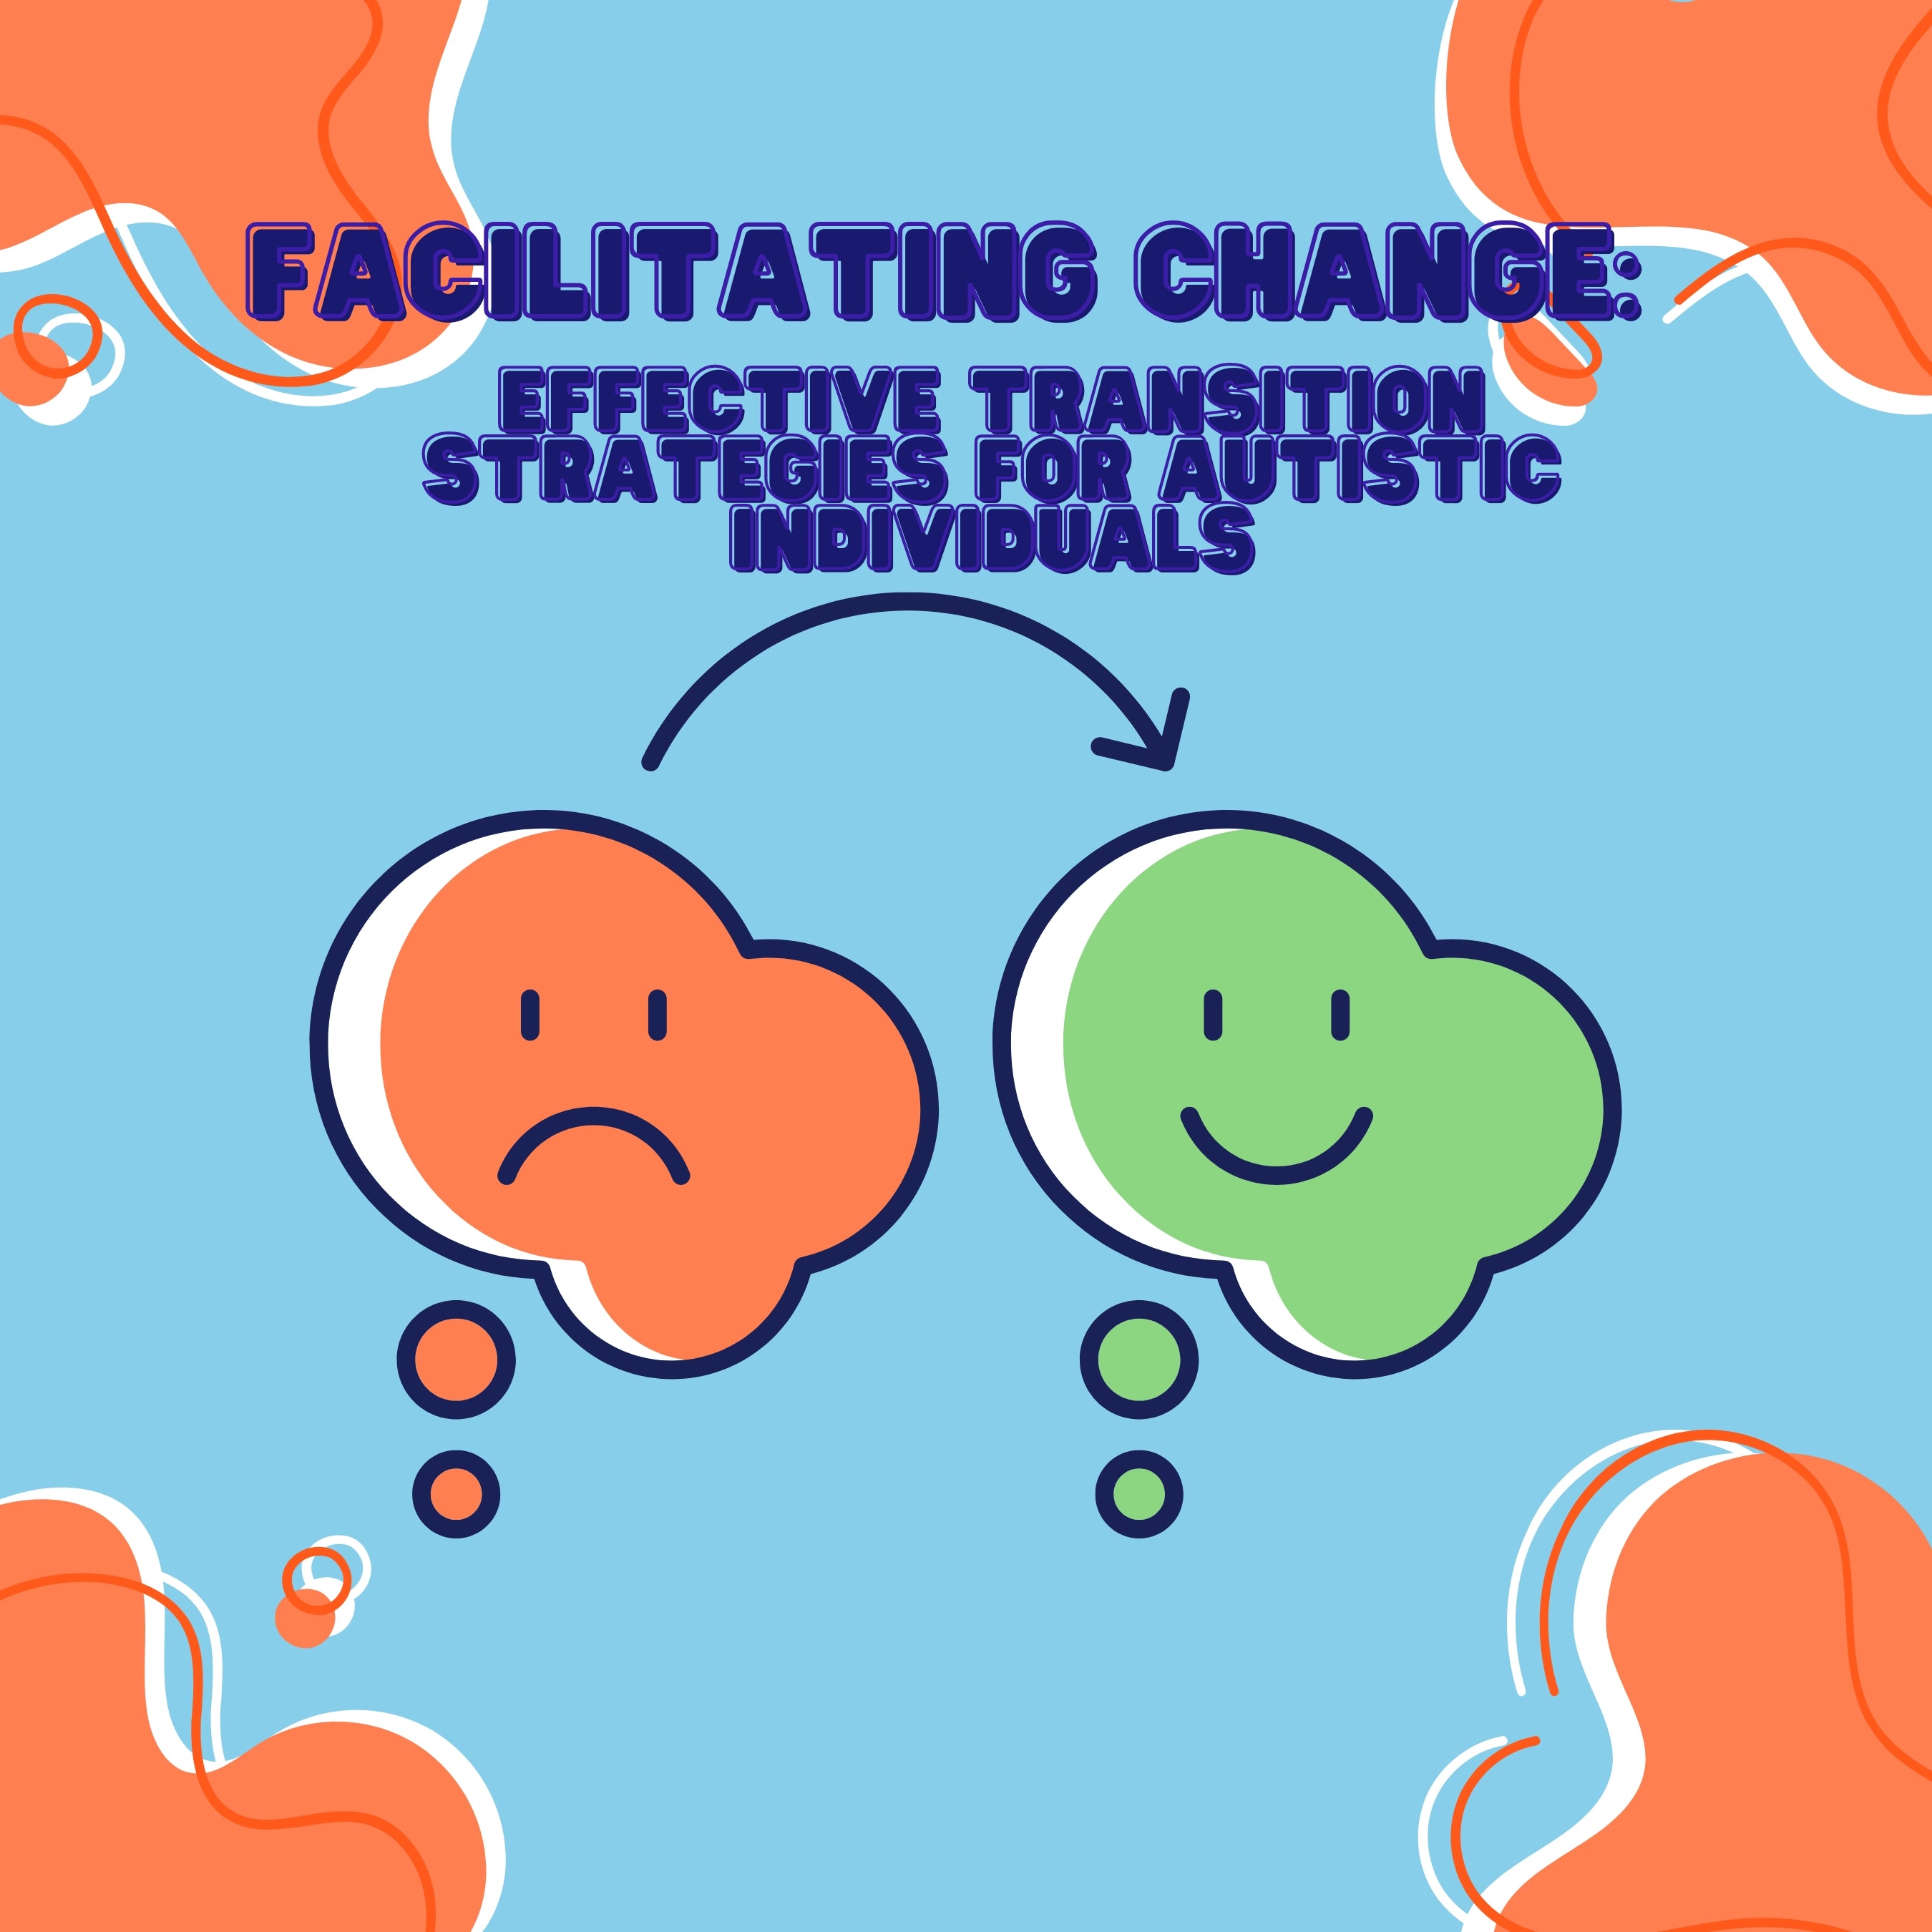 Facilitating Change: Effective Transition Strategies for Autistic Individuals